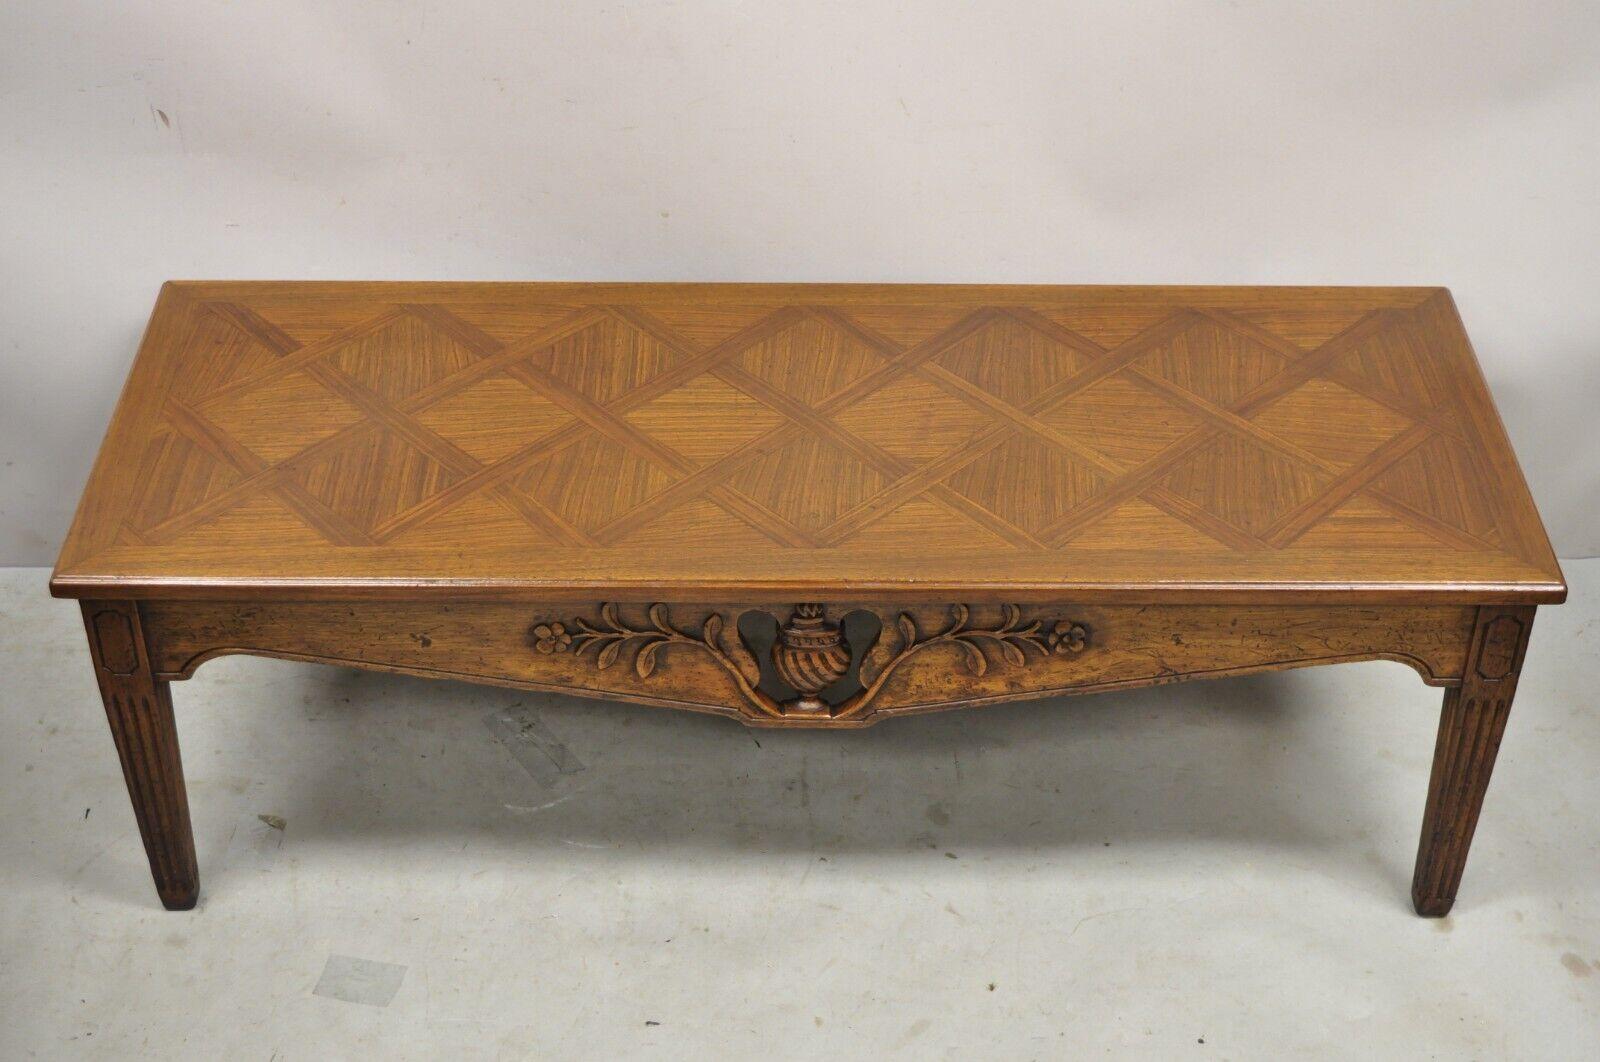 Vintage Italian Provincial Walnut French Country Parquetry Inlay Coffee Table In Good Condition For Sale In Philadelphia, PA